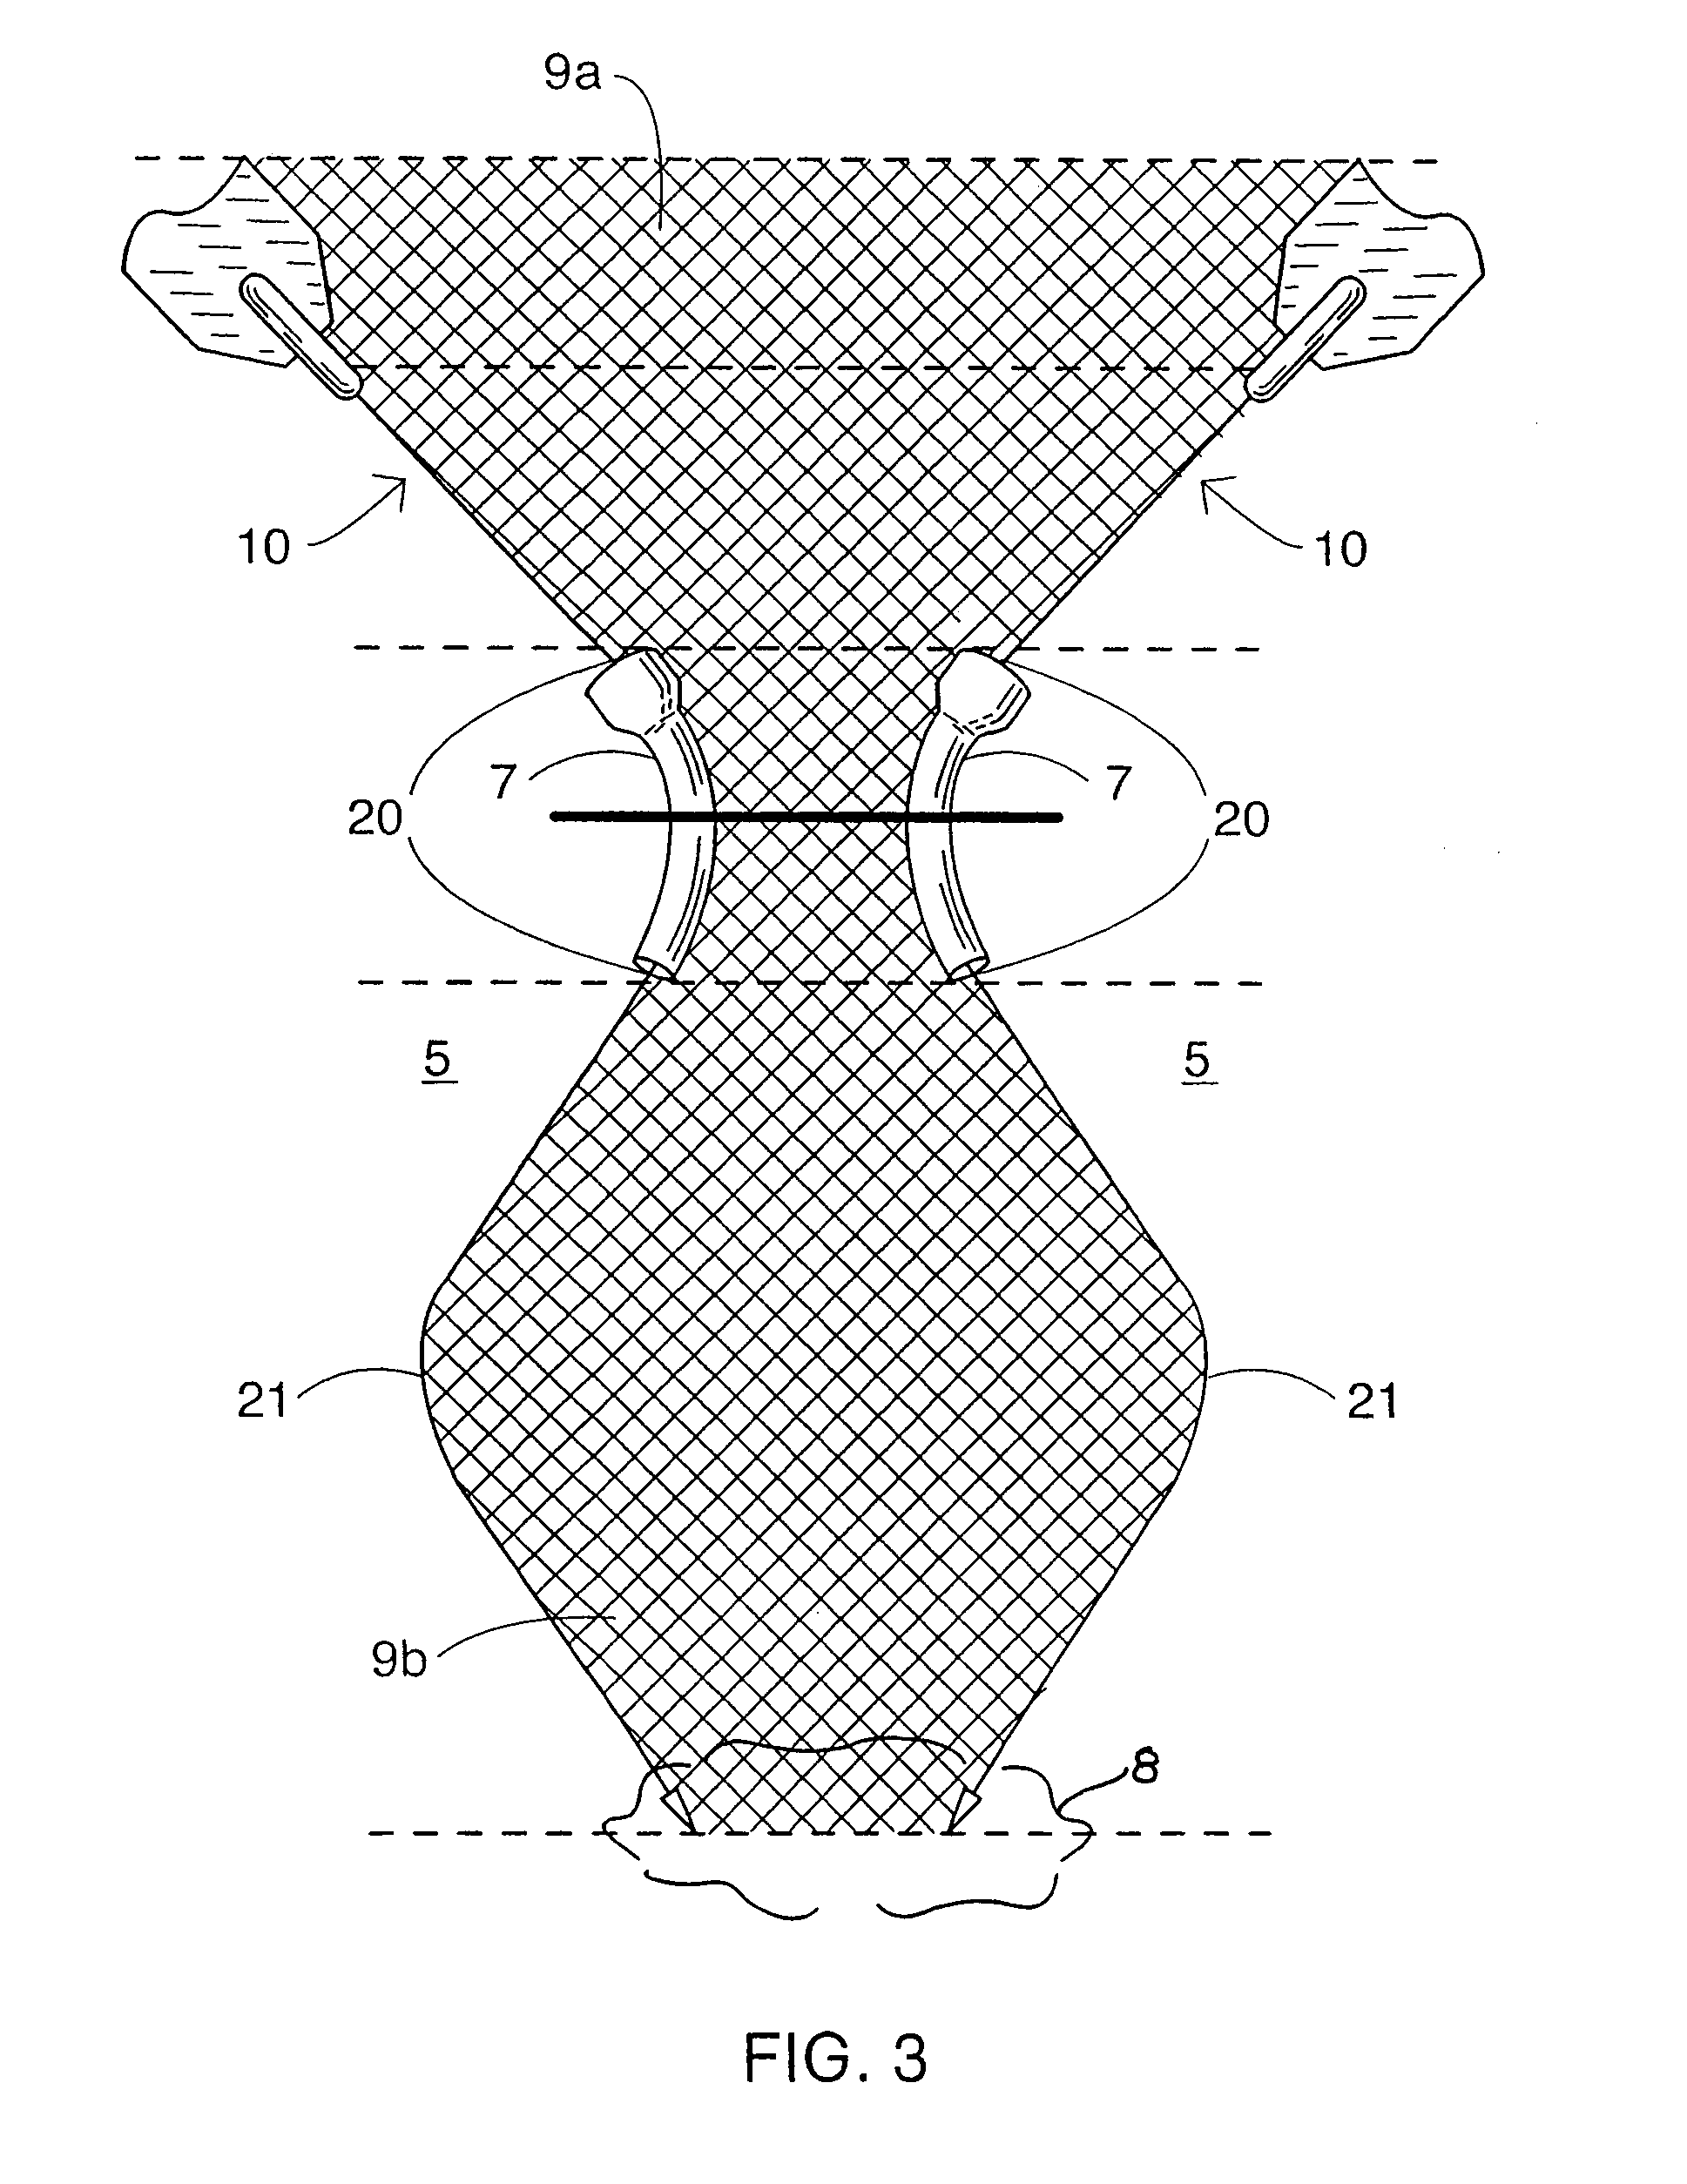 Laparoscopic instrument and trocar system and related surgical method